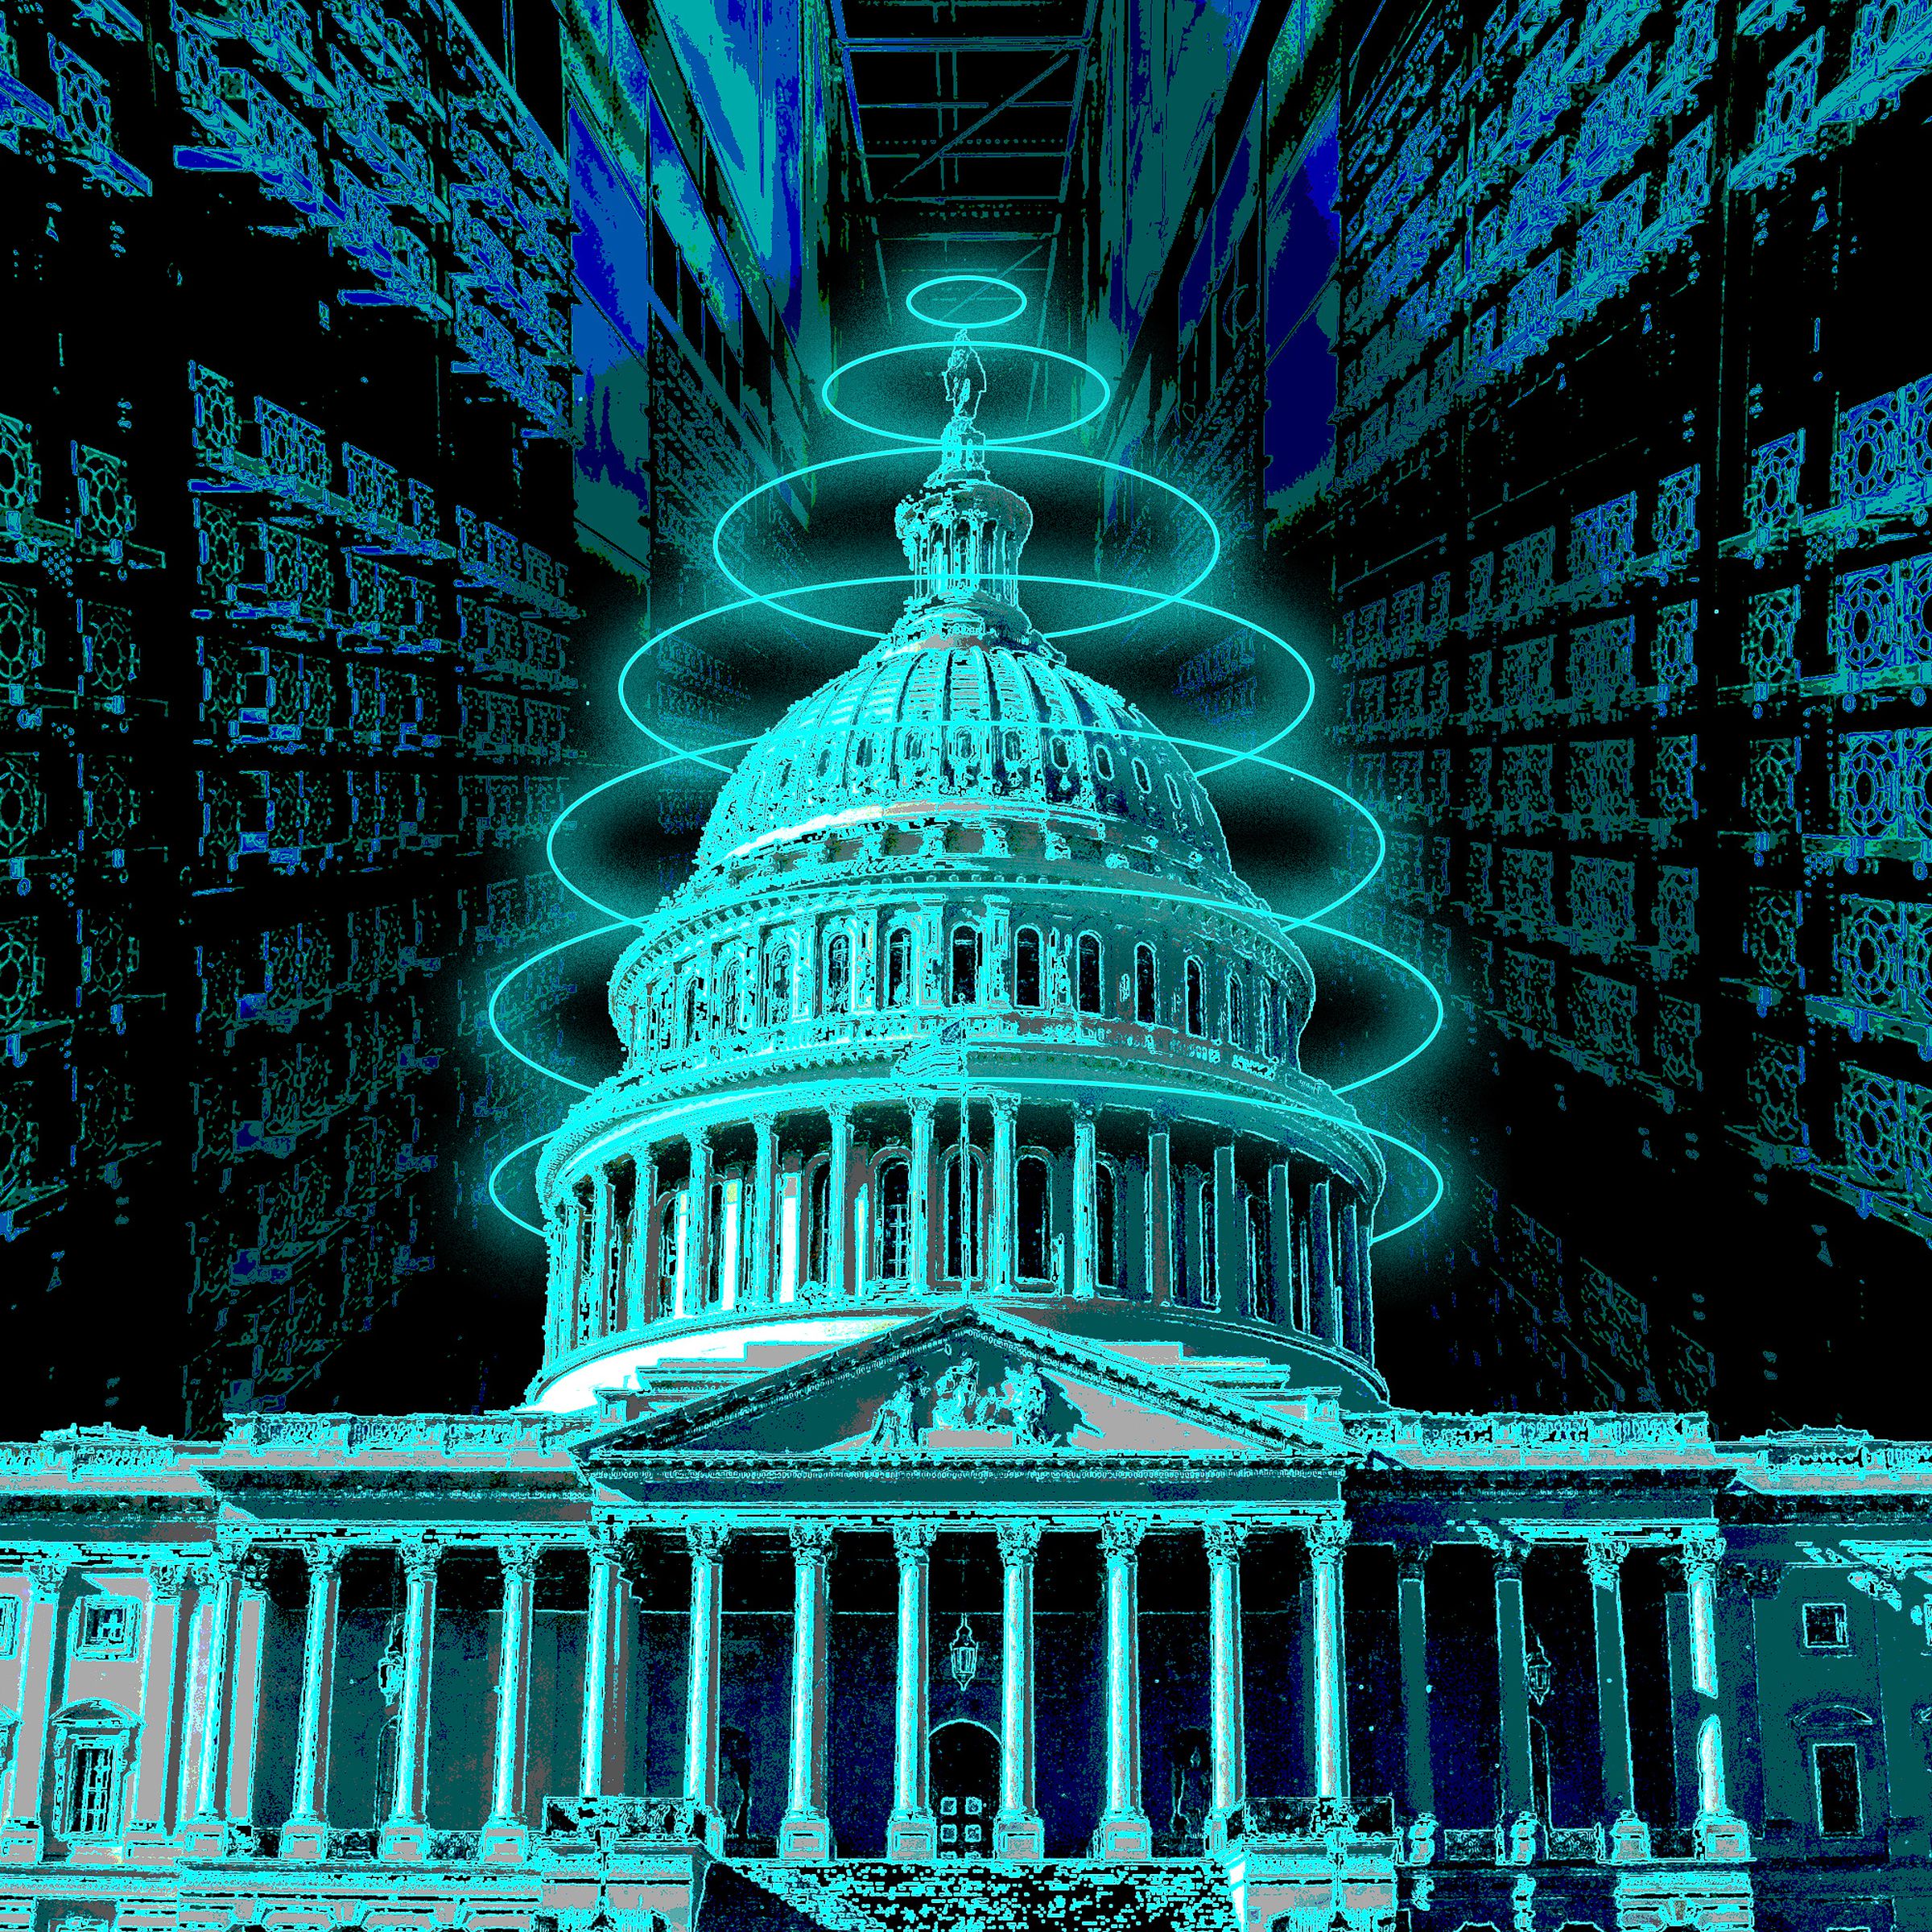 A picture of the US Capitol stylized with rings around the dome.